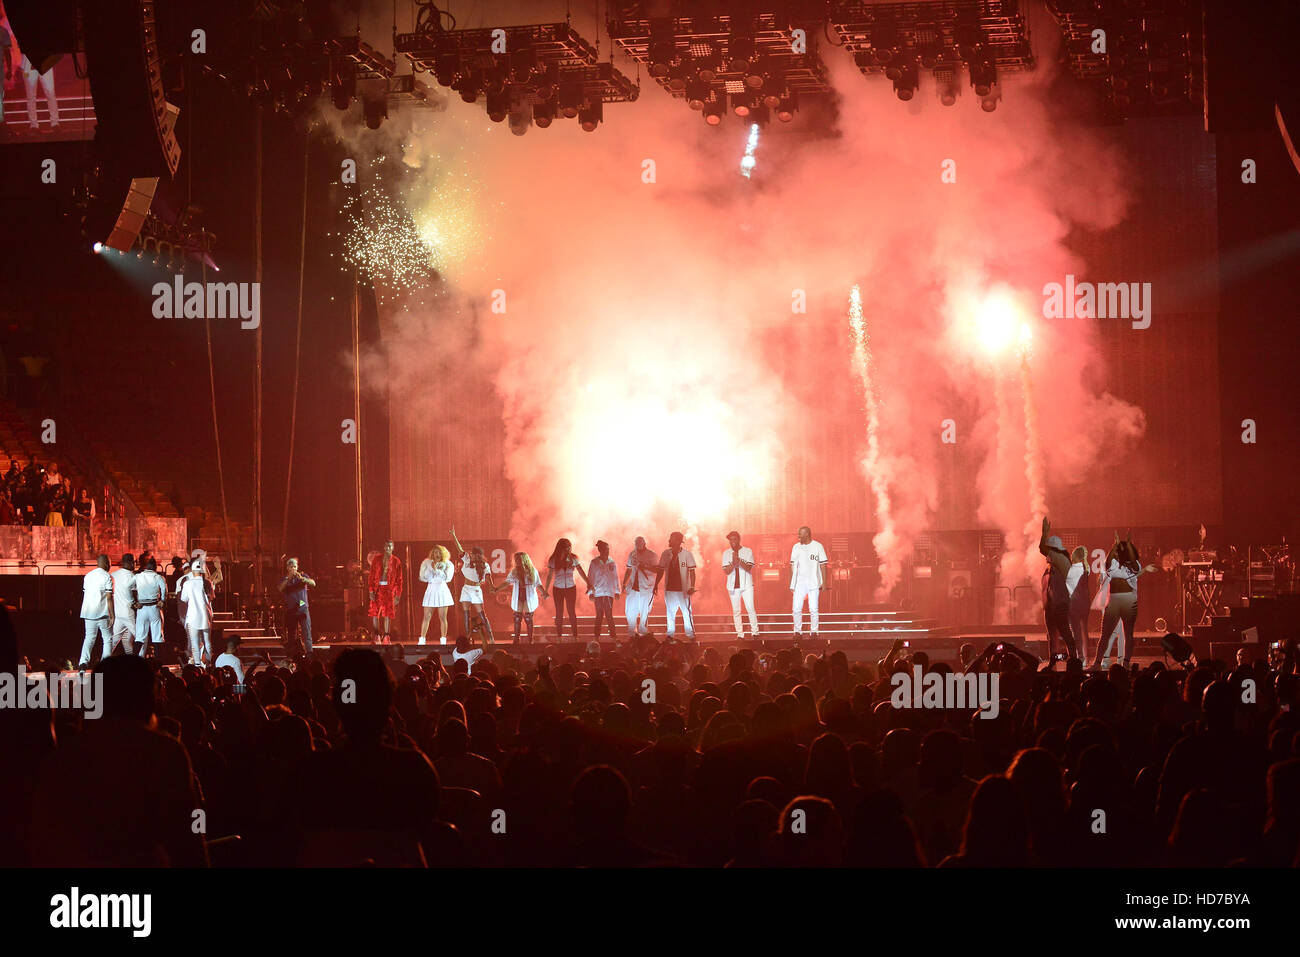 Total, Carl Thomas, Sheek Louch of The Lox, Sean 'Diddy' Combs aka Puff Daddy, 112, Mase, Faith Evans, Stevie J and Lil' Kim perform onstage during the Bad Boy Family Reunion Tour at American Airlines Arena in Miami, Florida.  Featuring: Total, Carl Thoma Stock Photo